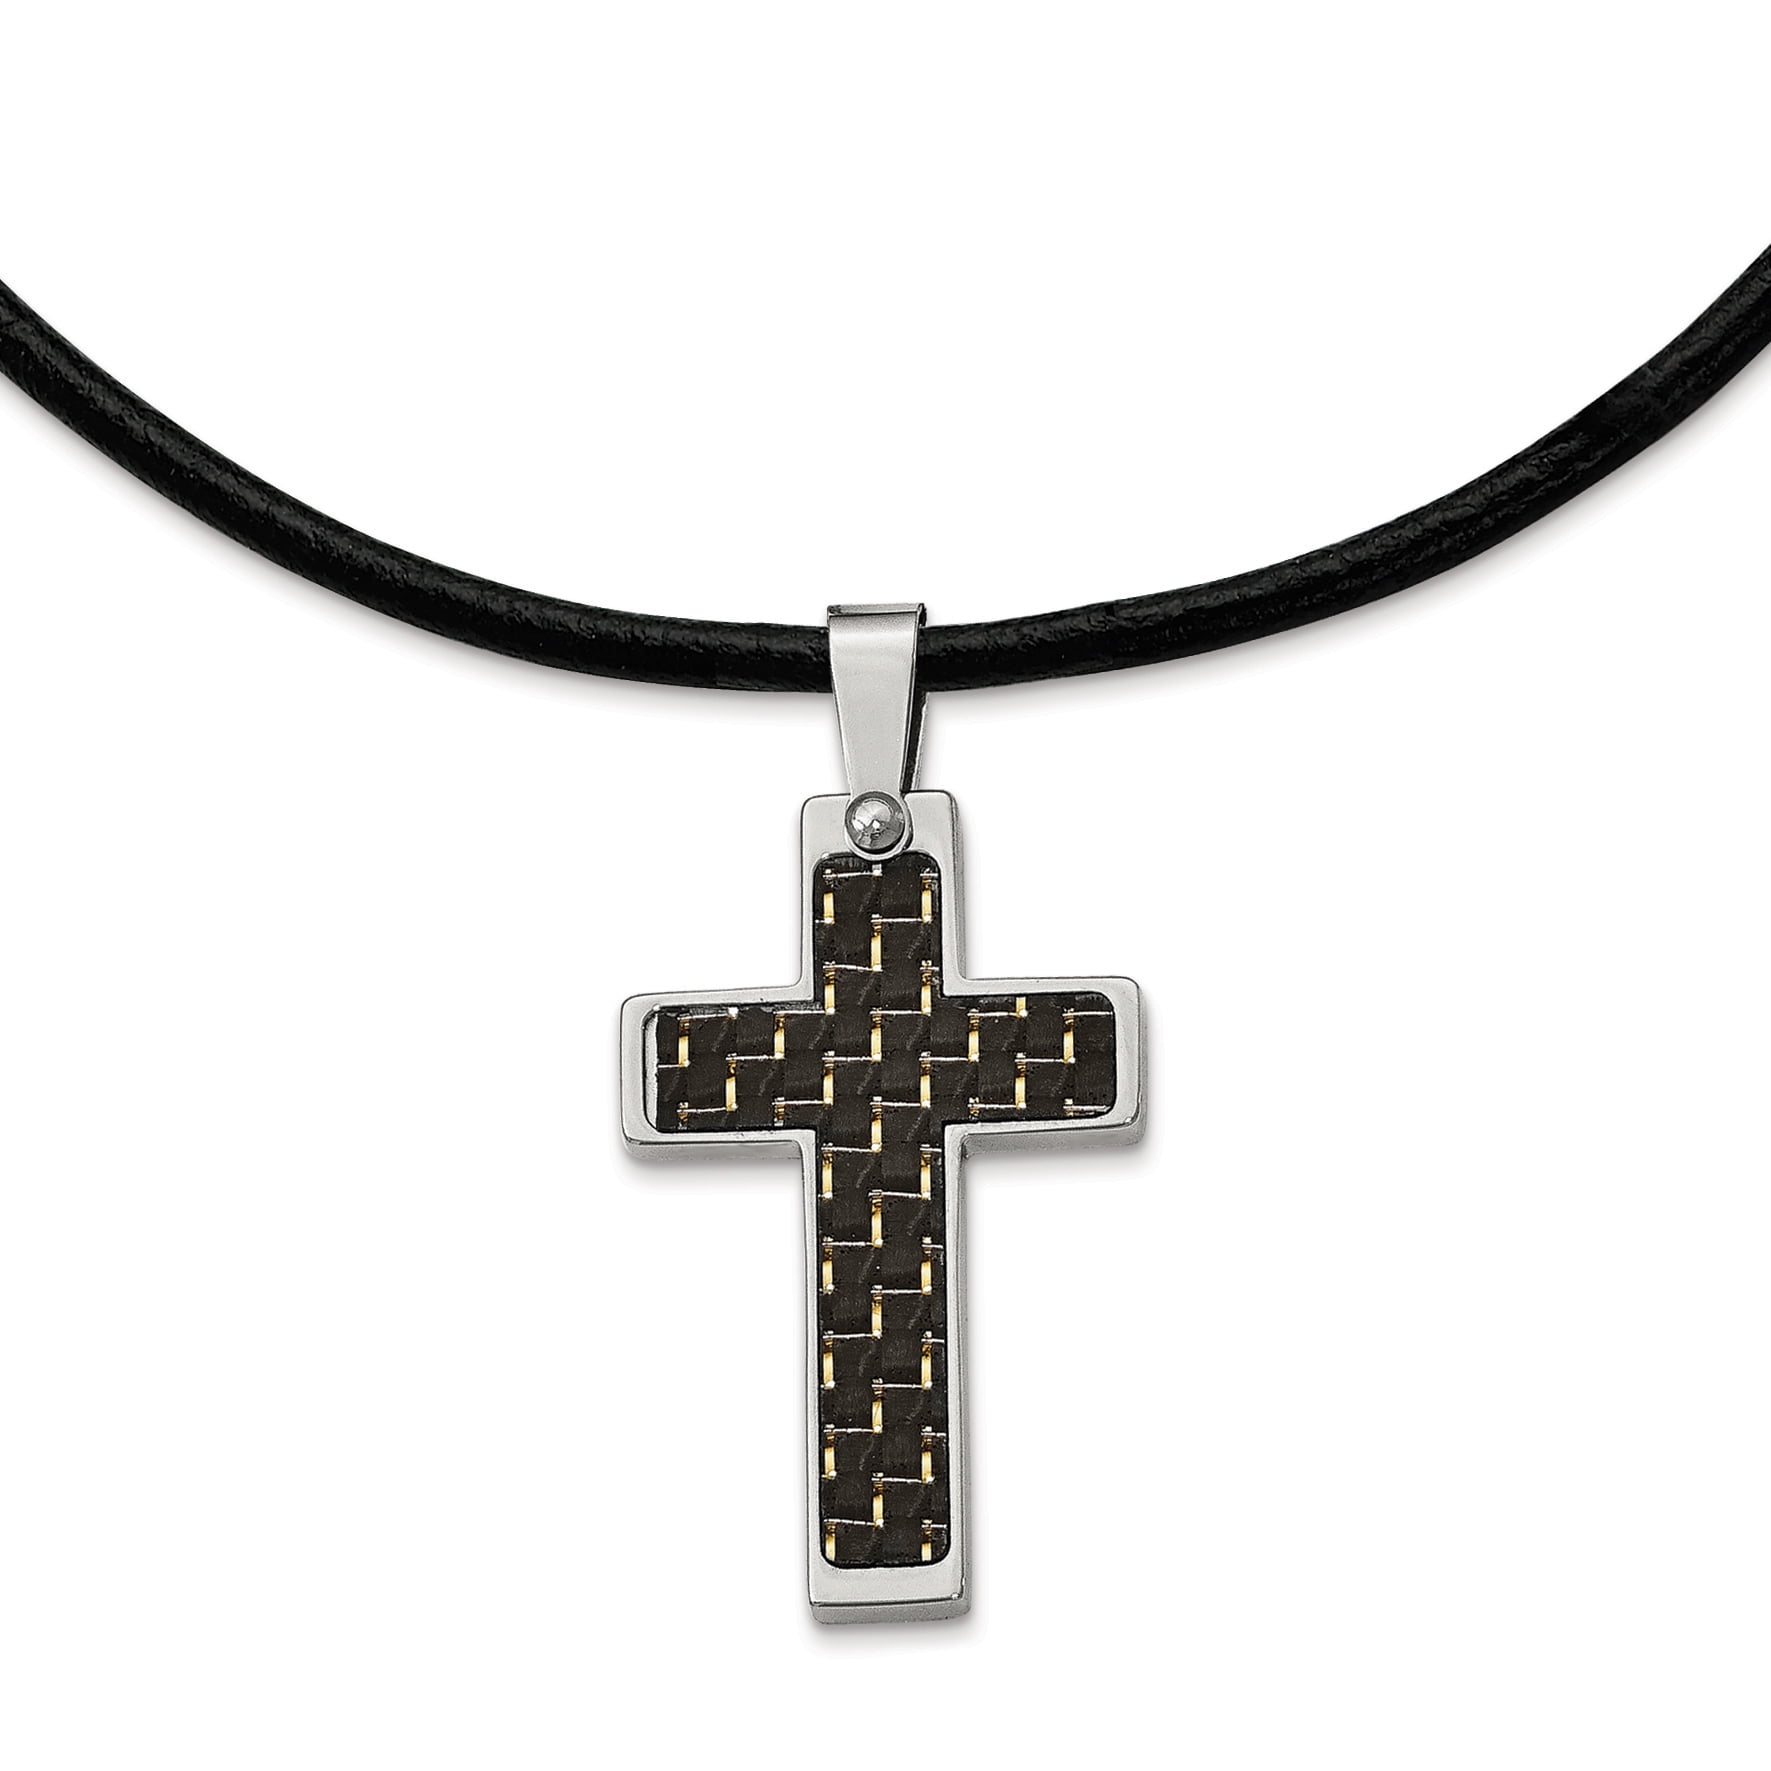 Stainless Steel with Black Carbon Fiber Inlay Cross Pendant Chain Necklace 